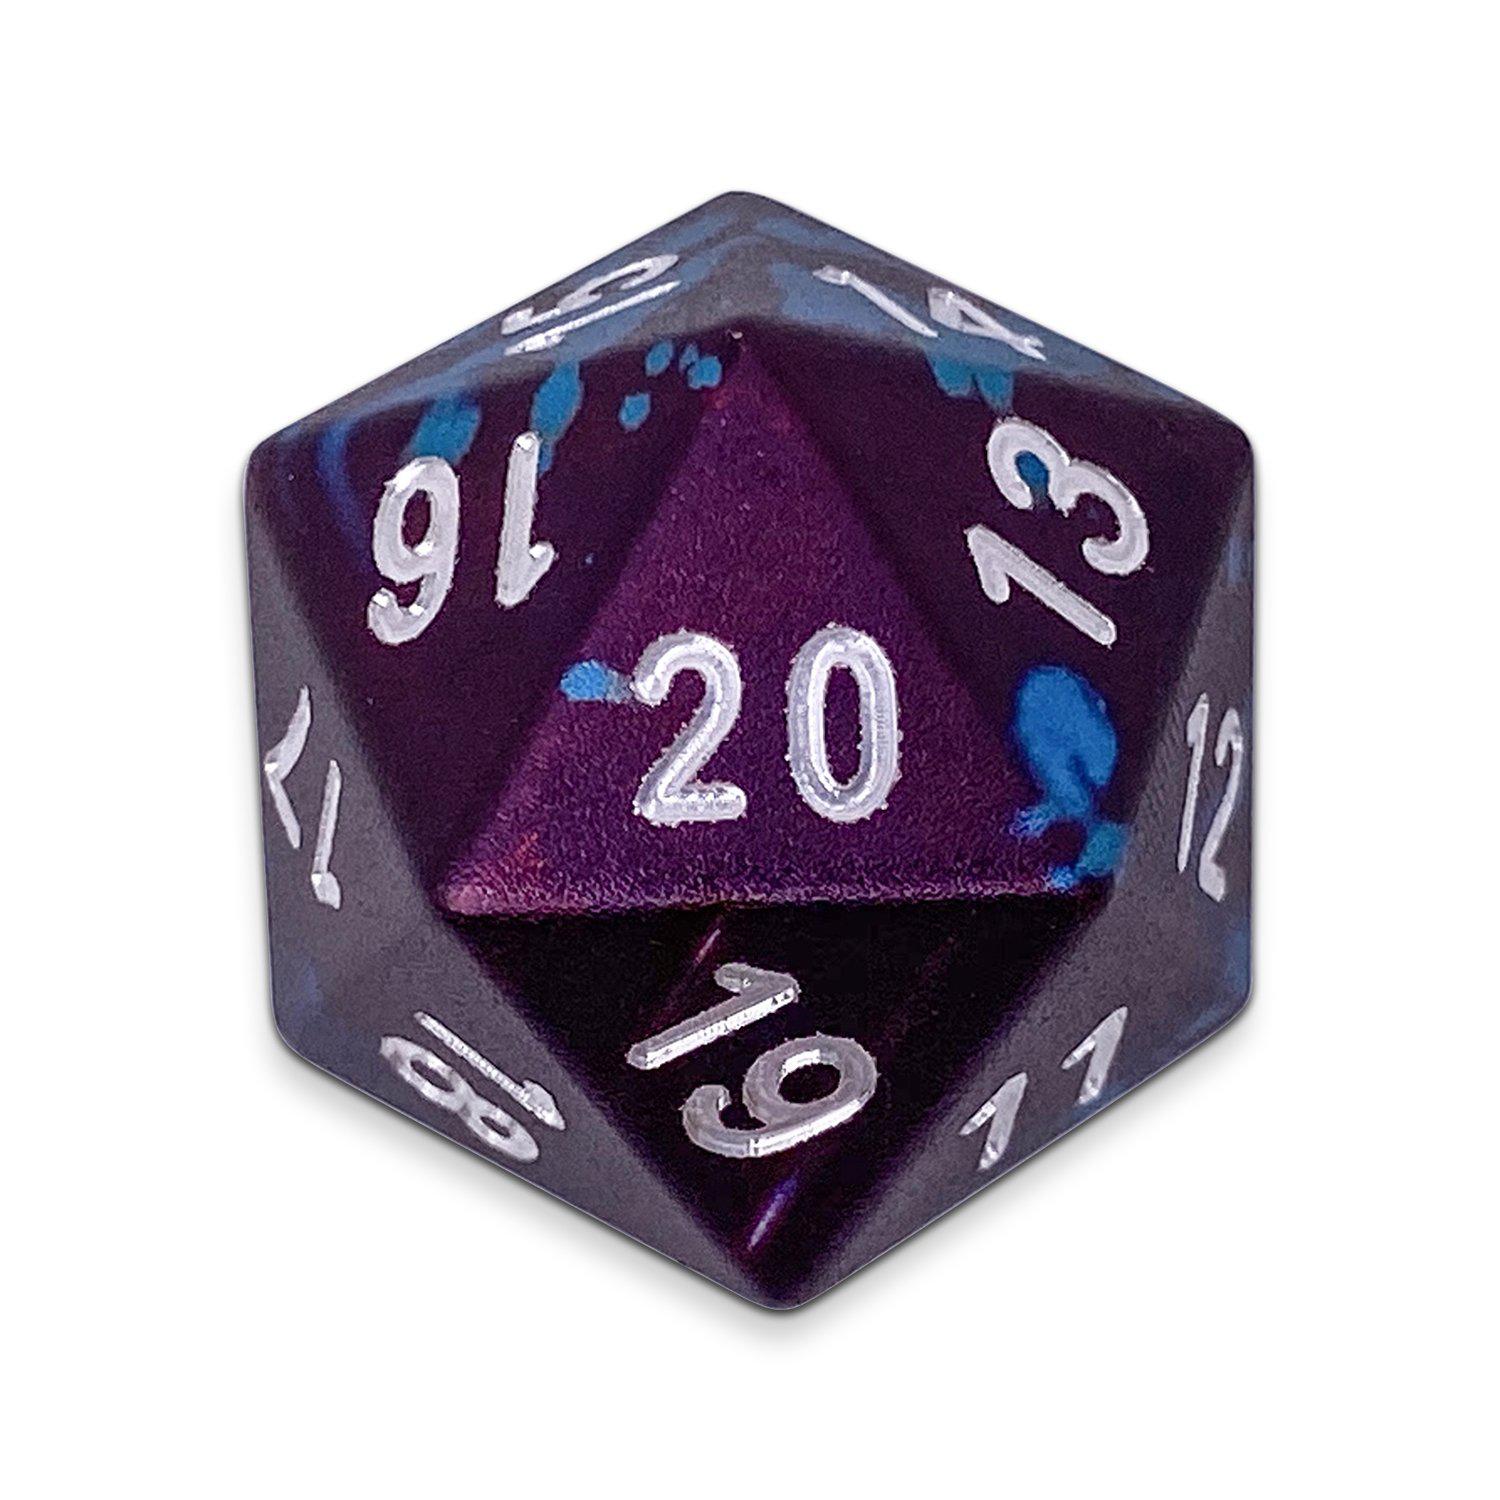 Single Wondrous Dice® Countdown D20 in Faerie Dragon by Norse Foundry 6063 Aircraft Grade Aluminum - NOR 02445